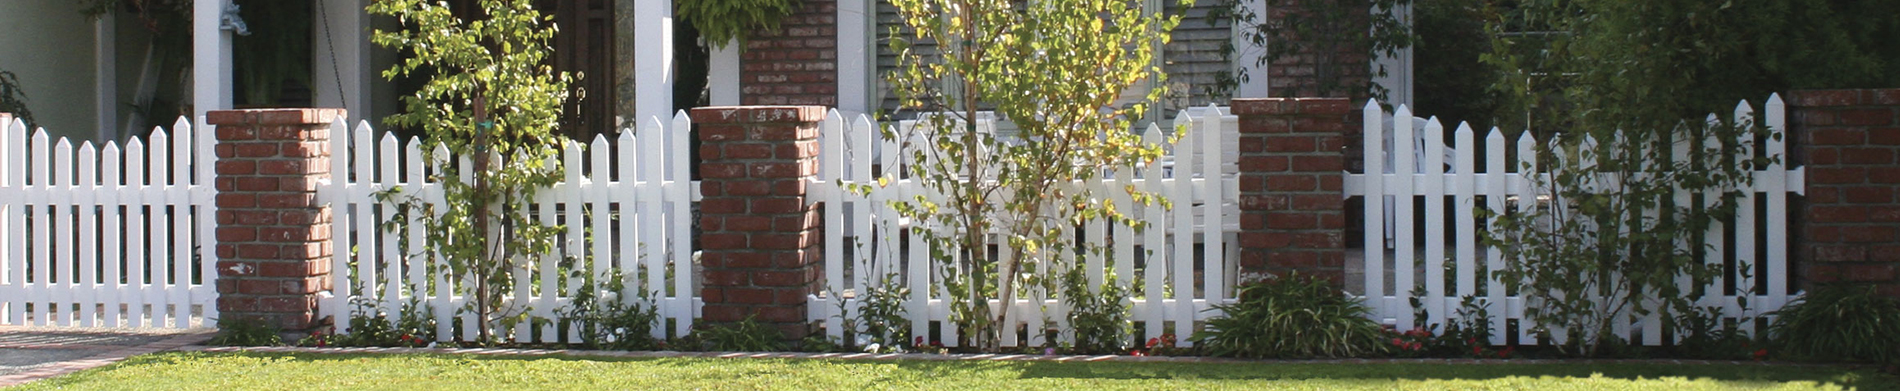 Why You Should Use a Fencing Calculator When Purchasing a Vinyl Fence?